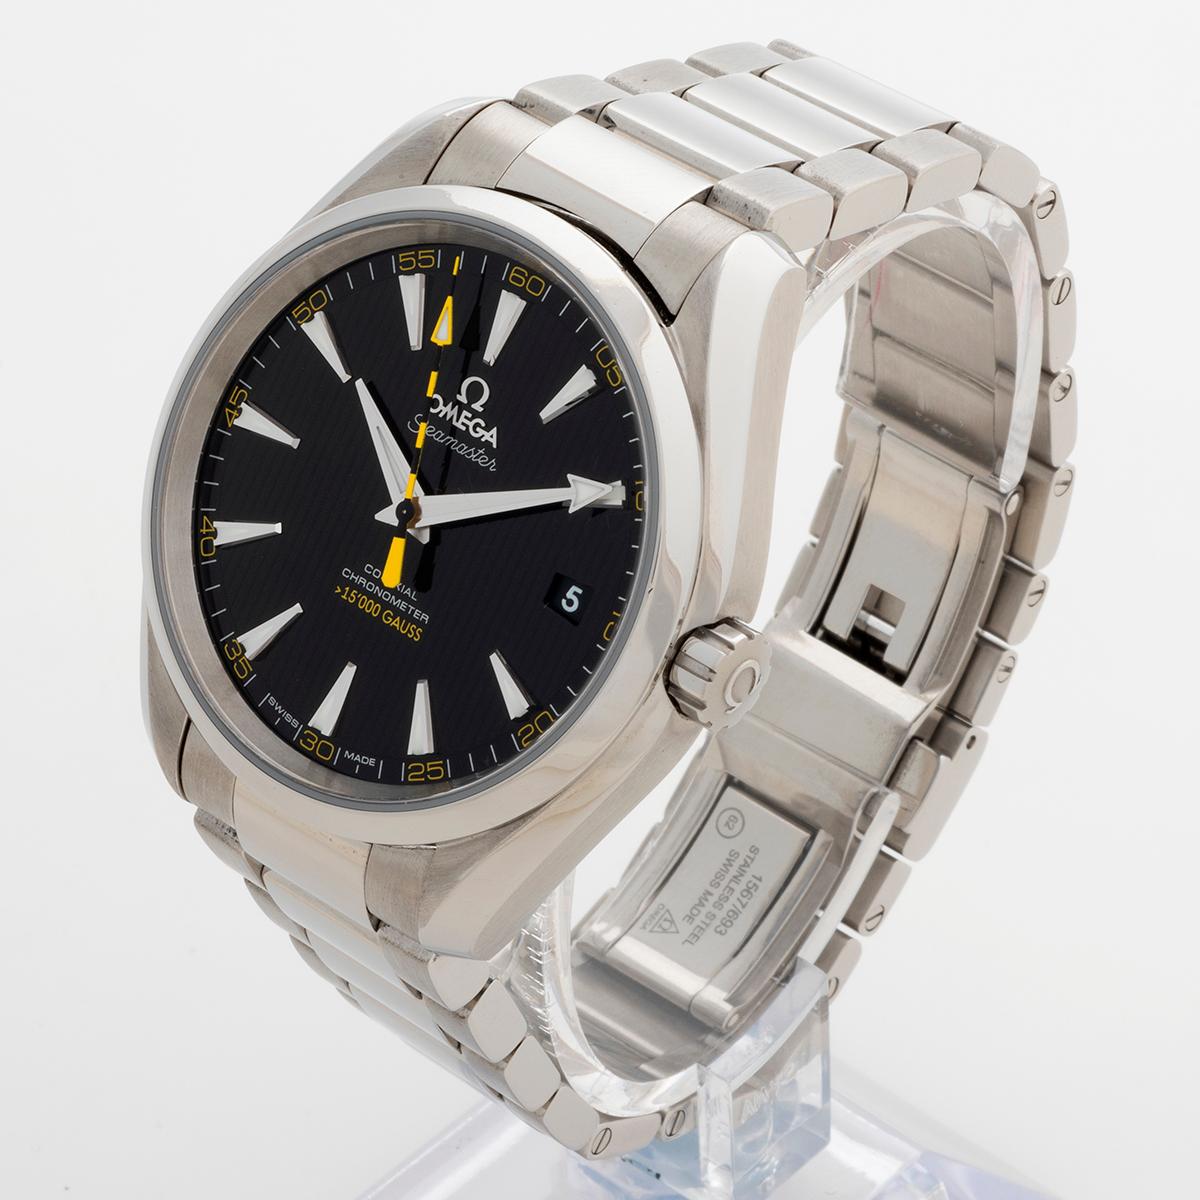 Omega Seamaster Aqua Terra Wristwatch. Co-Axial Movement, Stainless Steel, 2014. 1